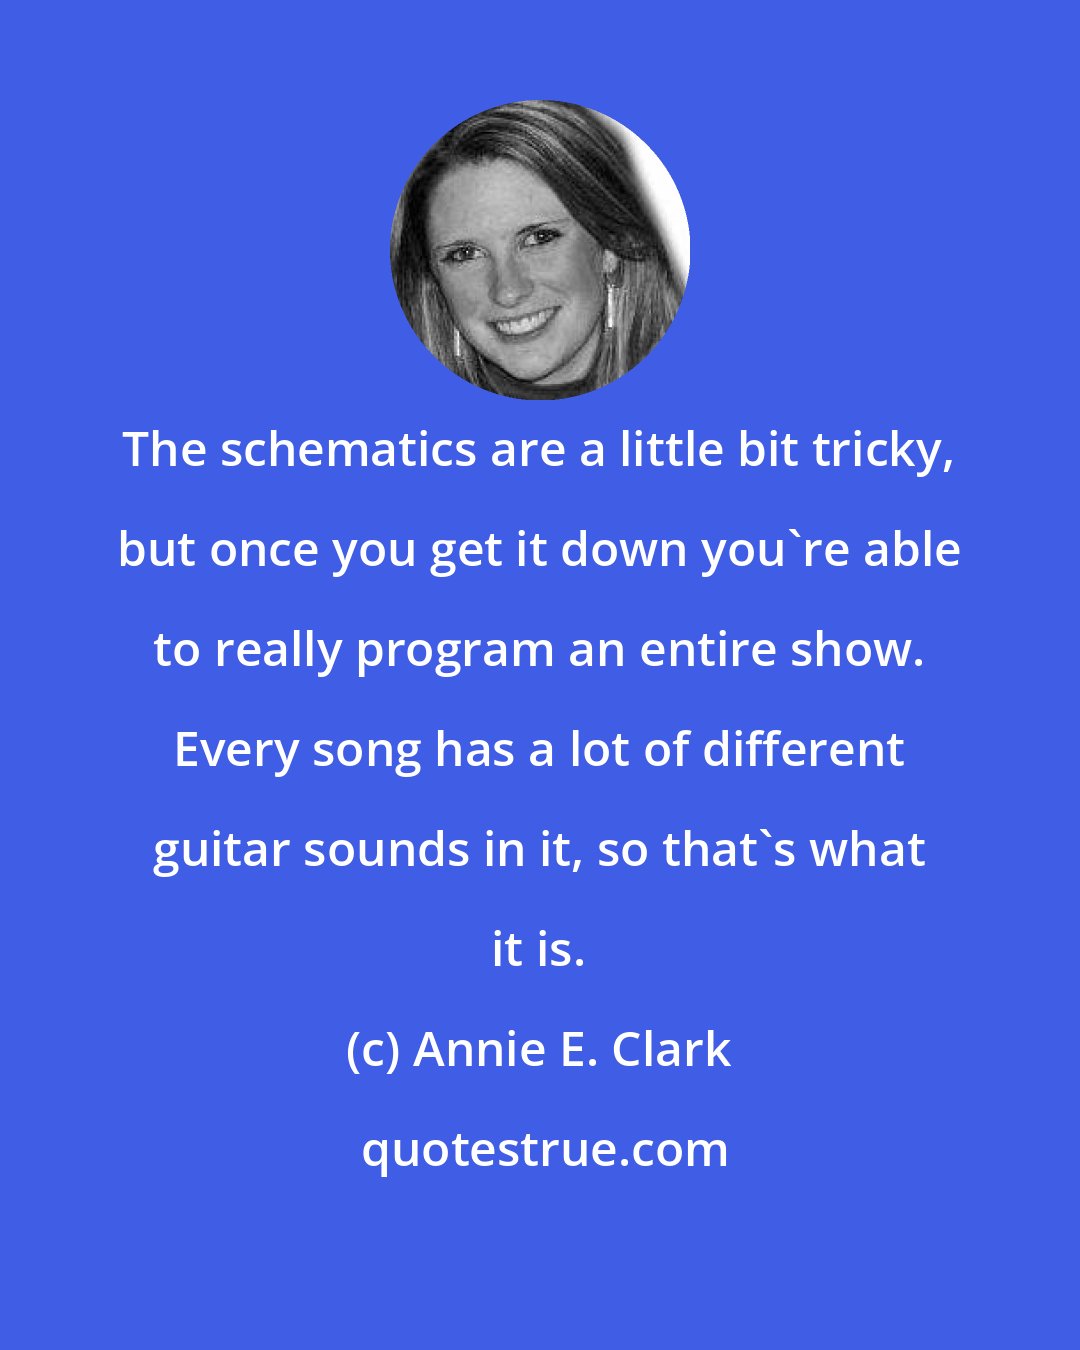 Annie E. Clark: The schematics are a little bit tricky, but once you get it down you're able to really program an entire show. Every song has a lot of different guitar sounds in it, so that's what it is.